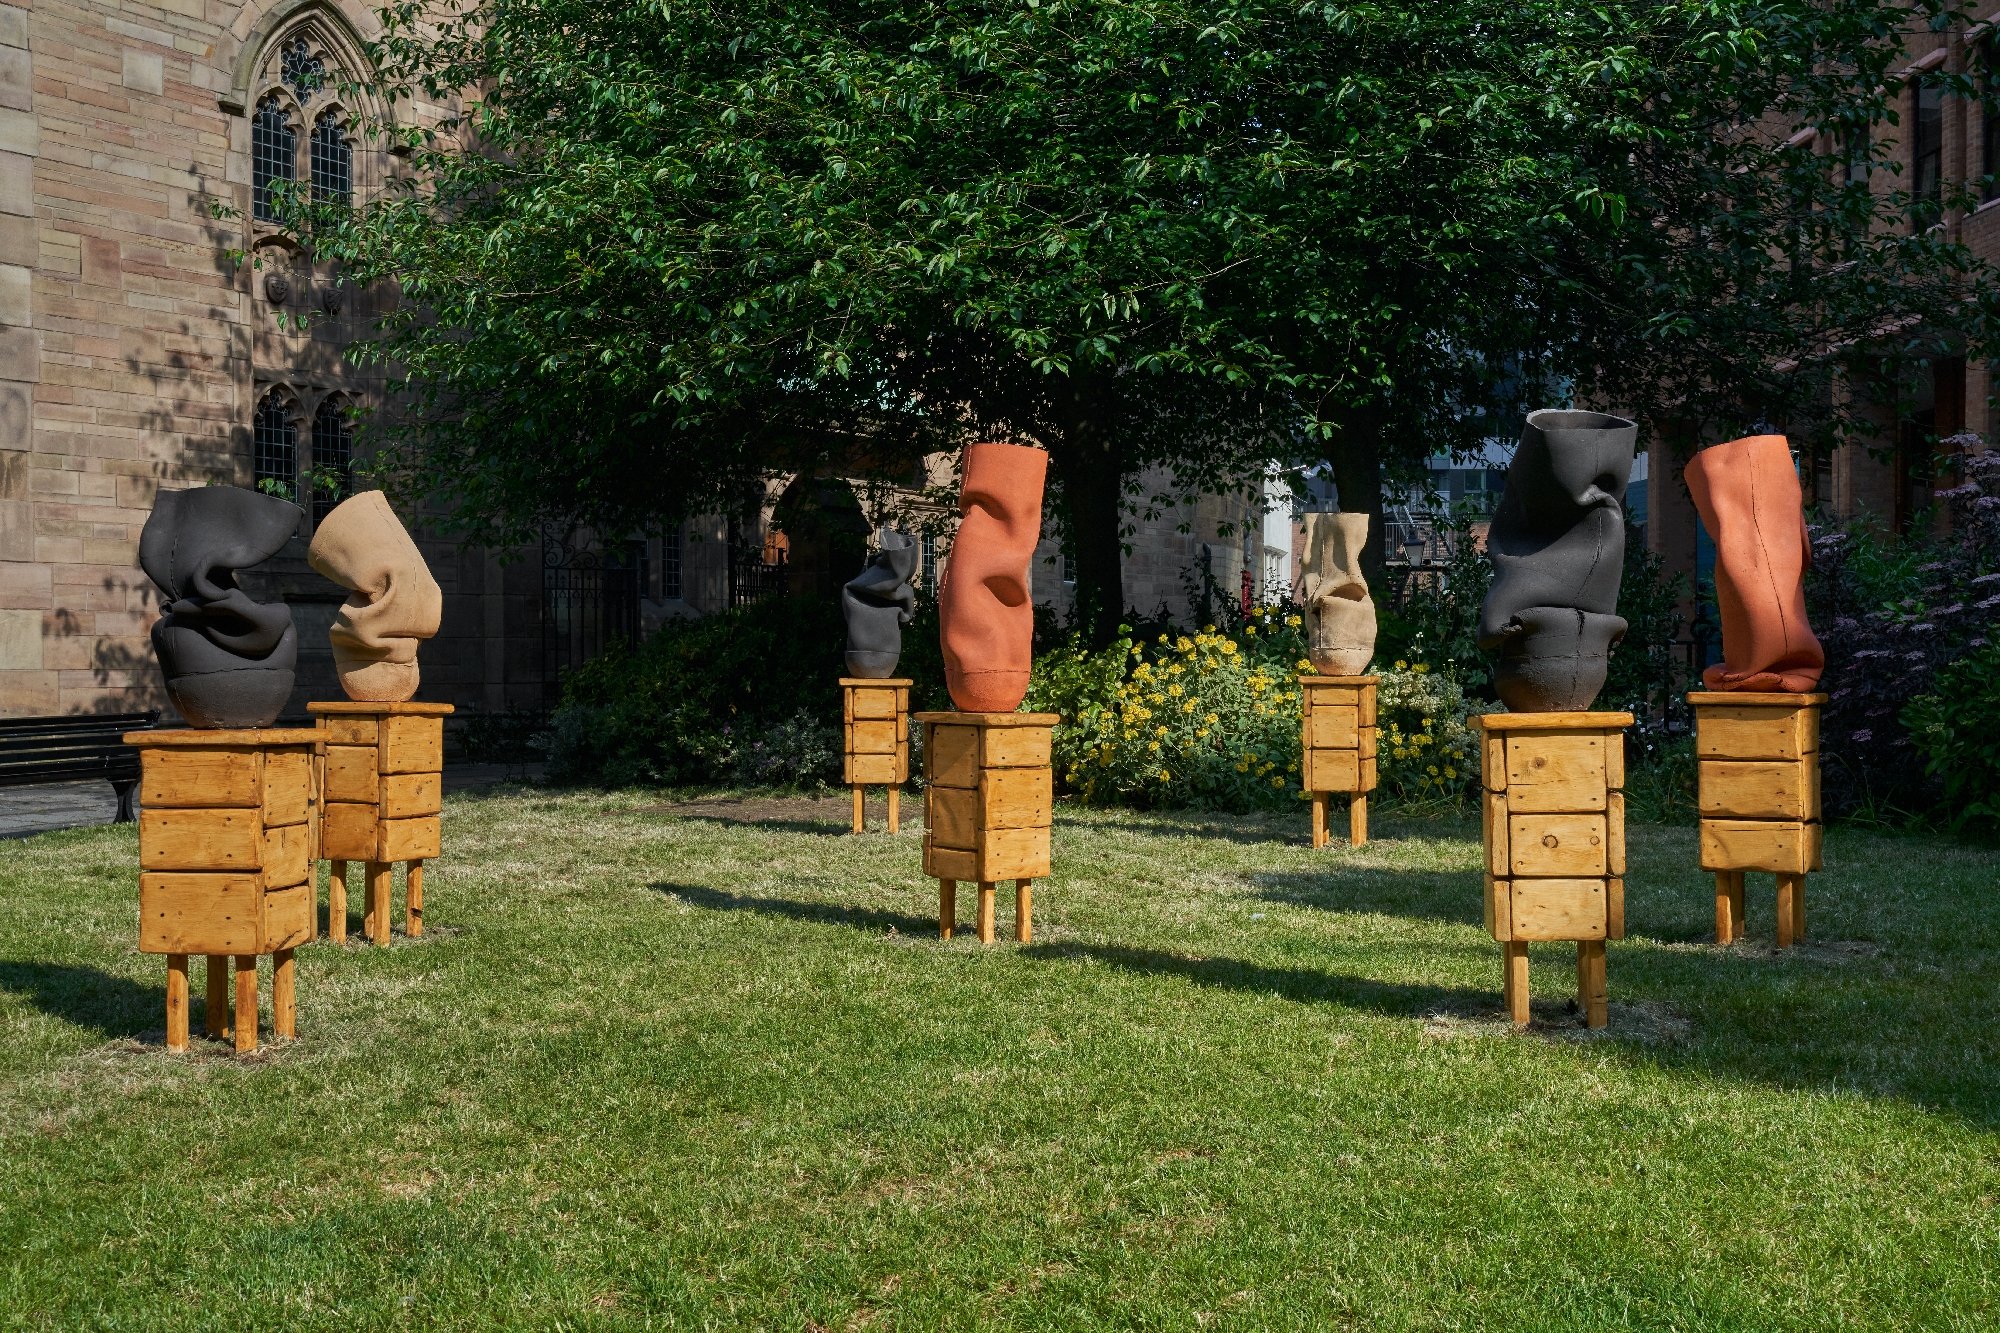 Ranti Bam, Ifas, 2023. Installation view at St Nicholas Church Gardens, Liverpool Biennial 2023. Photography by Rob Battersby. Courtesy Liverpool Biennial